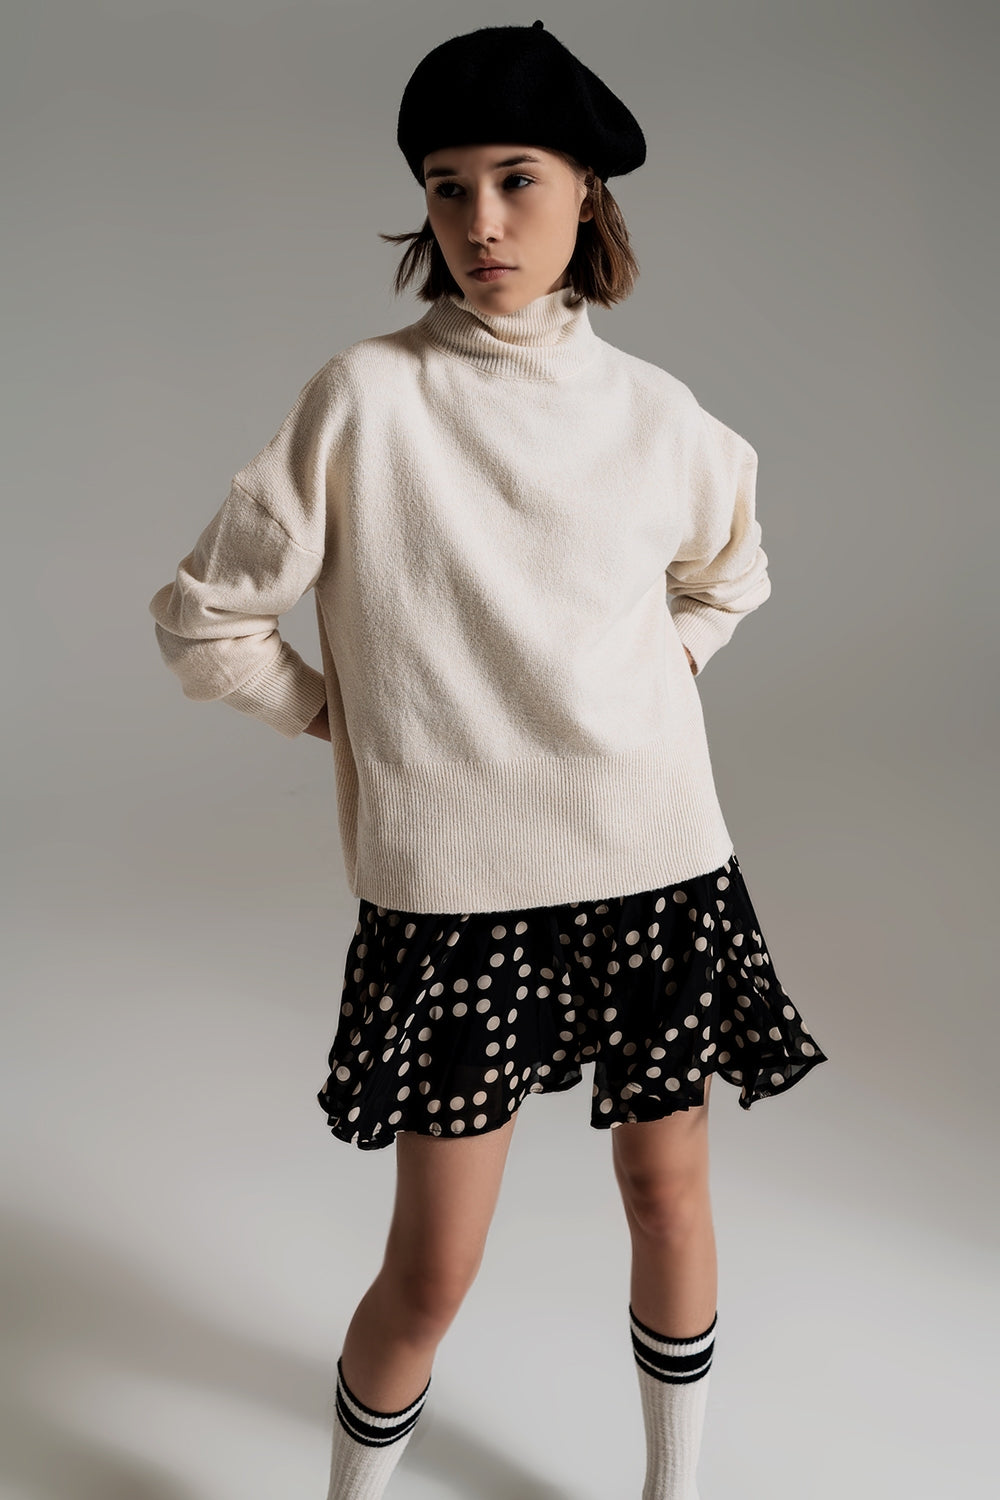 Beige Turtleneck Sweater in a Soft Knitted Fabric